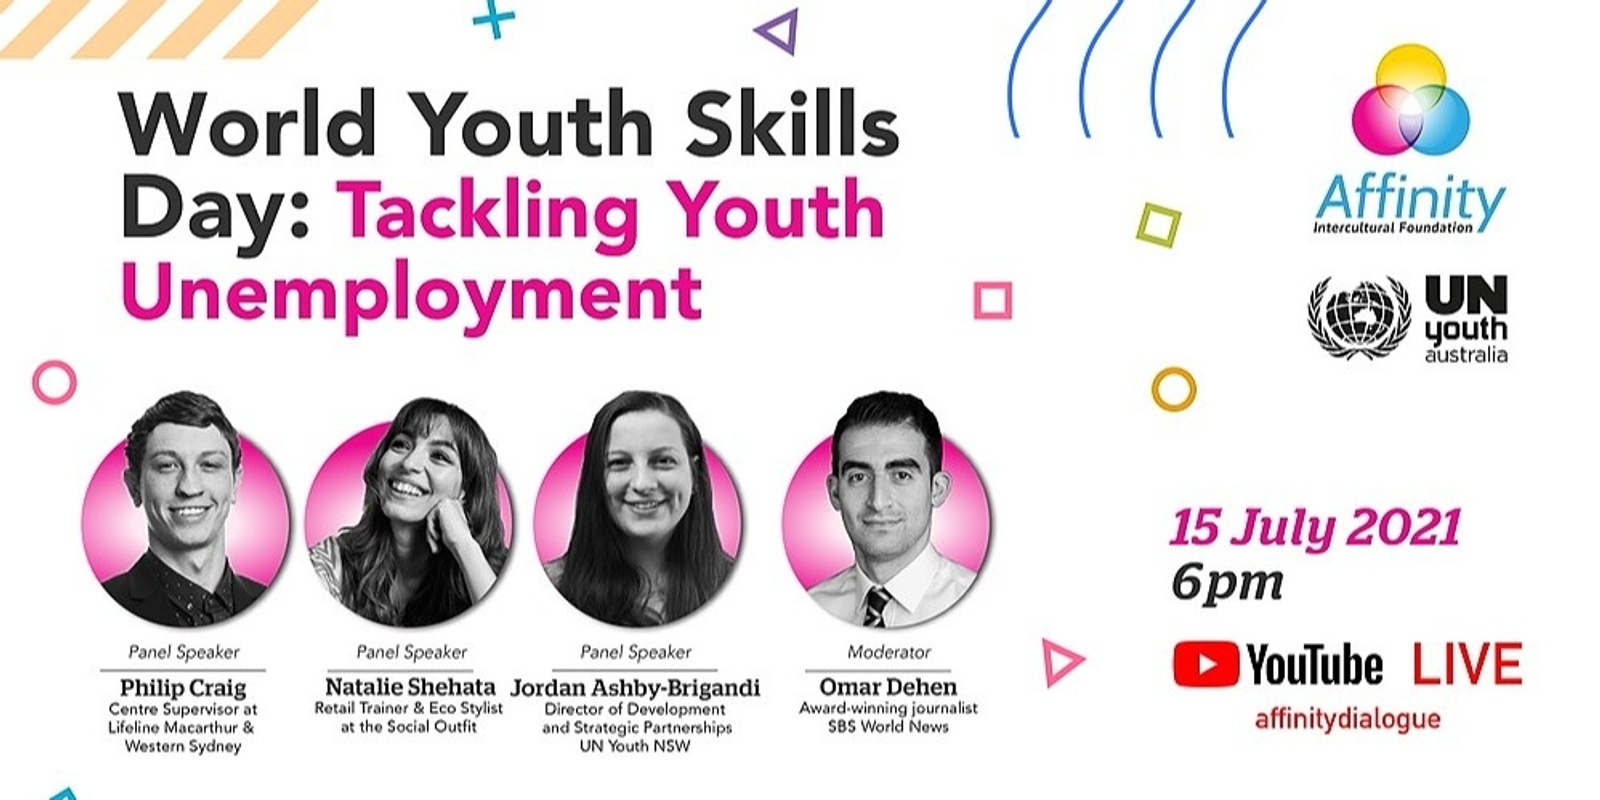 World Youth Skills Day: Tackling Youth Unemployment